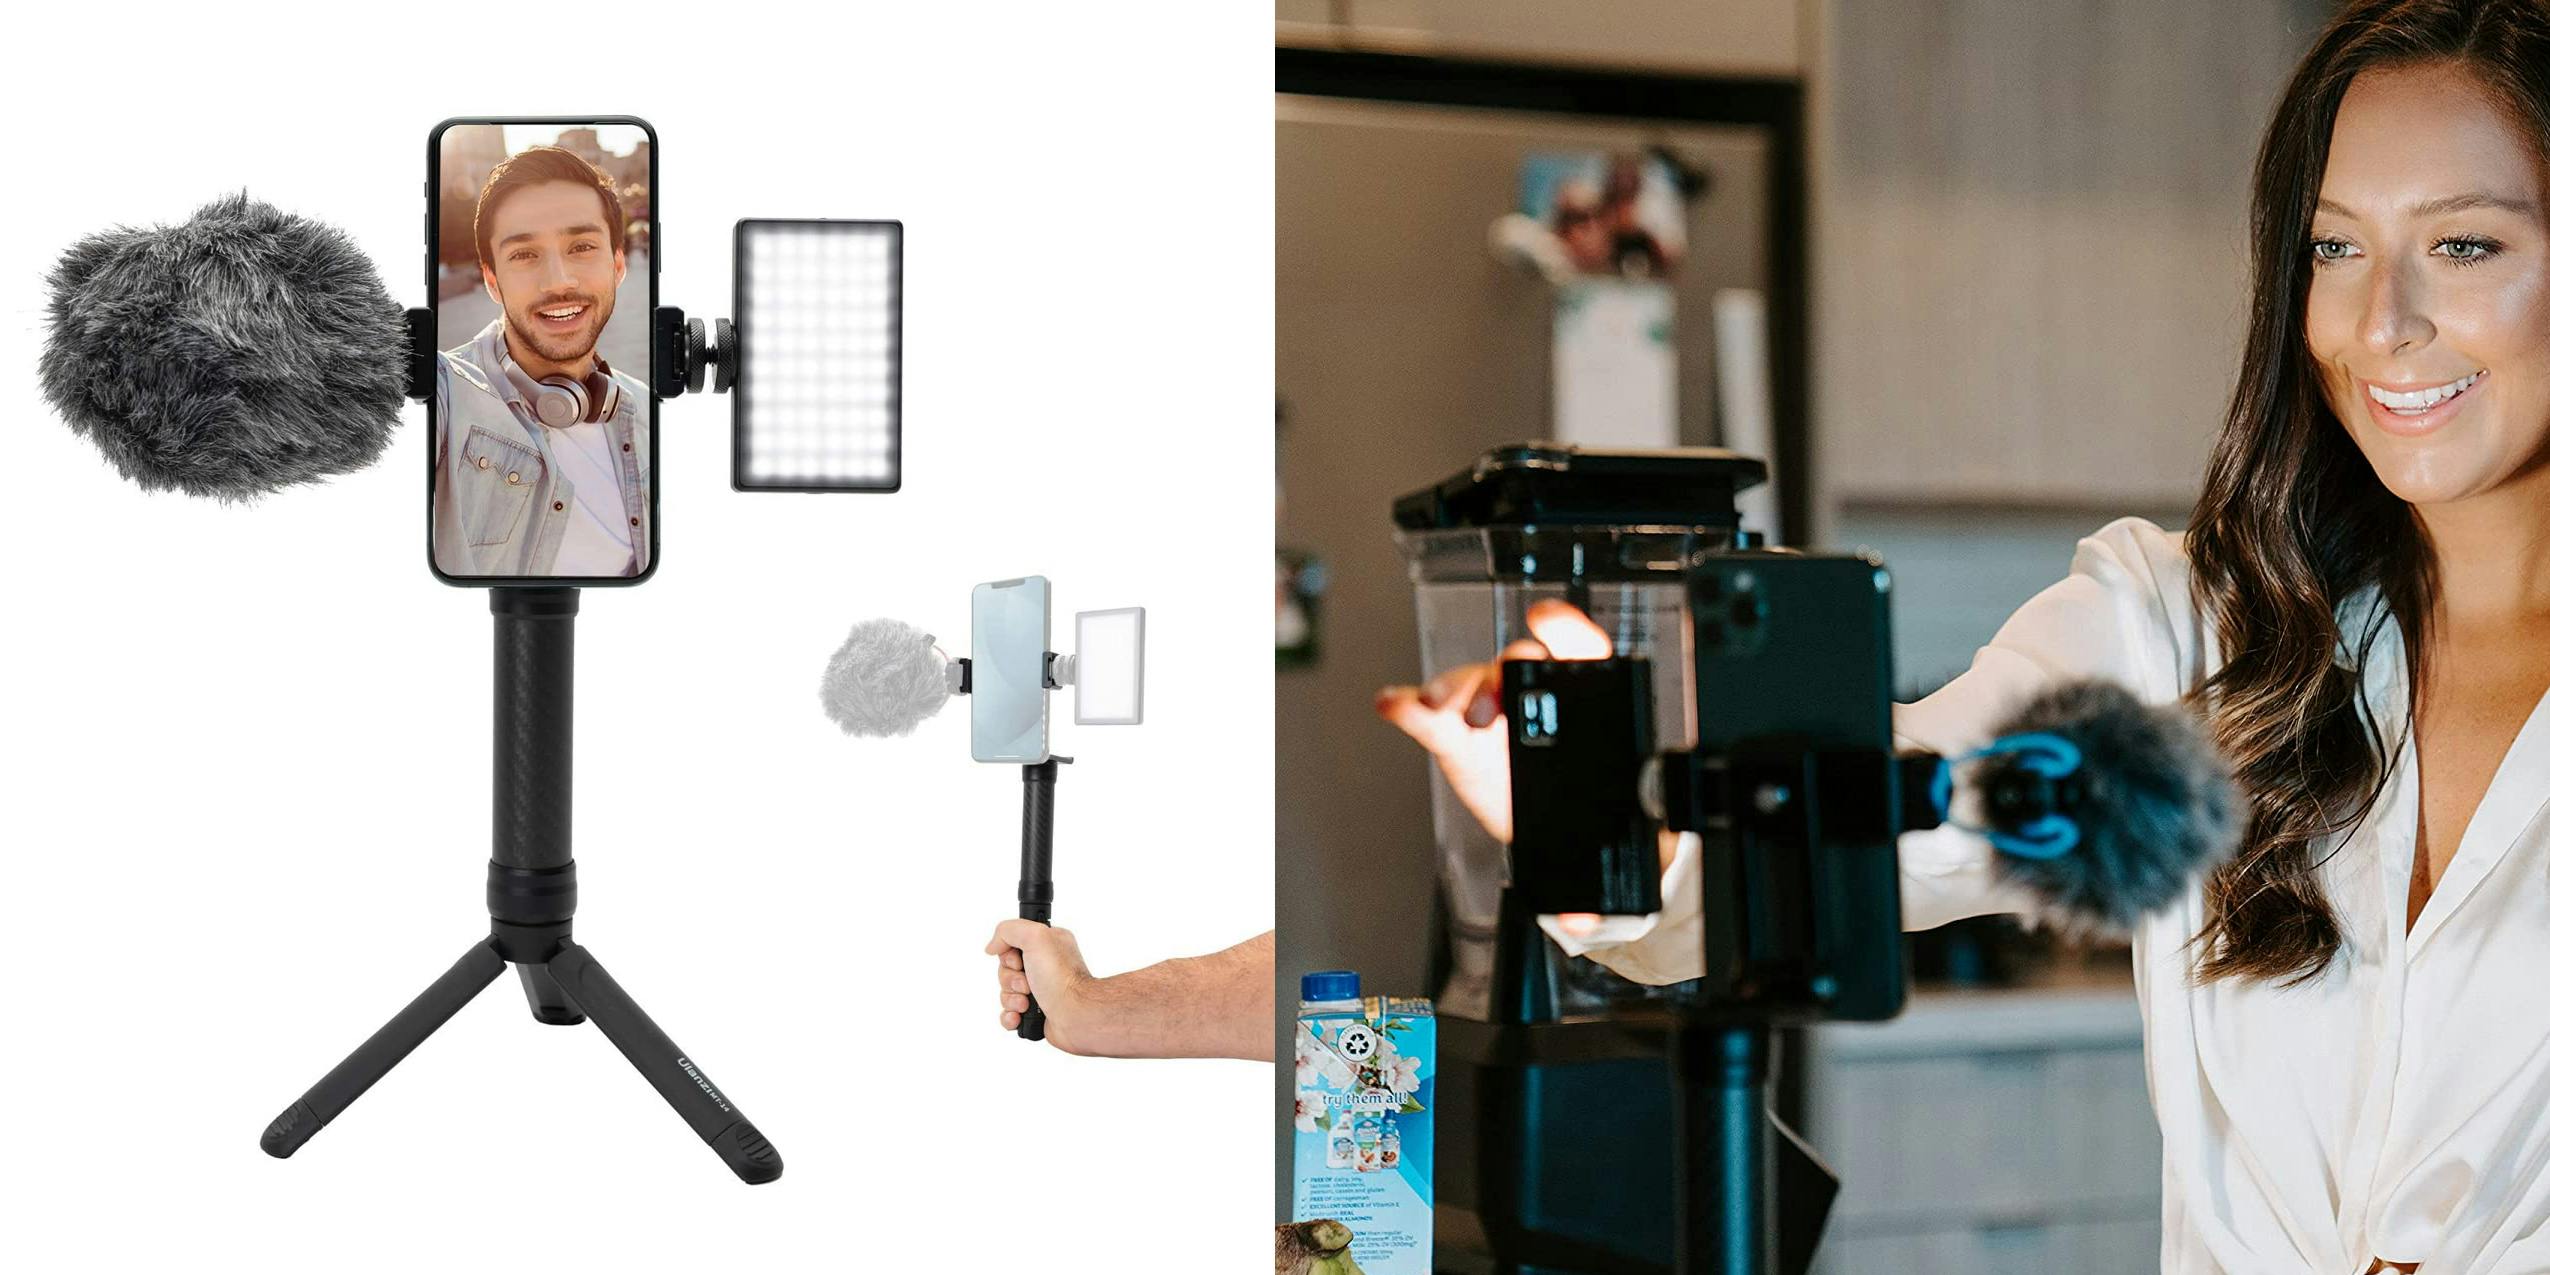 Lume Cube package product image along with a female videographer using the product.